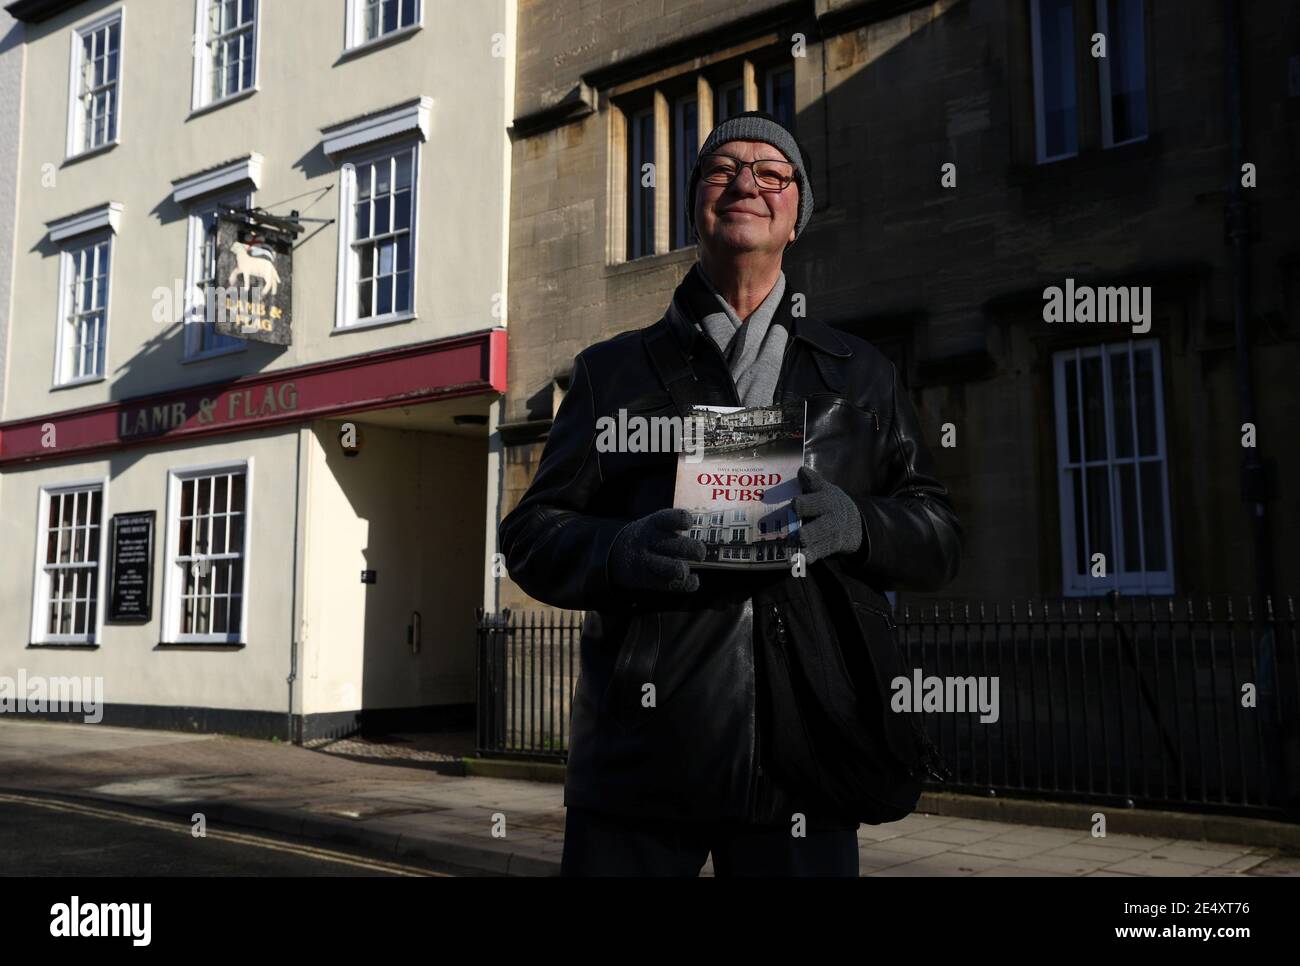 Spokesman for CAMRA (Campaign for Real Ale) Dave Richardson poses for a photograph outside The Lamb and Flag, the Grade-II listed pub being forced to close after more than 400 years of business, following outbreak of the coronavirus disease (COVID-19) pandemic, in central Oxford, Britain, January 25, 2021.  REUTERS/Eddie Keogh Stock Photo